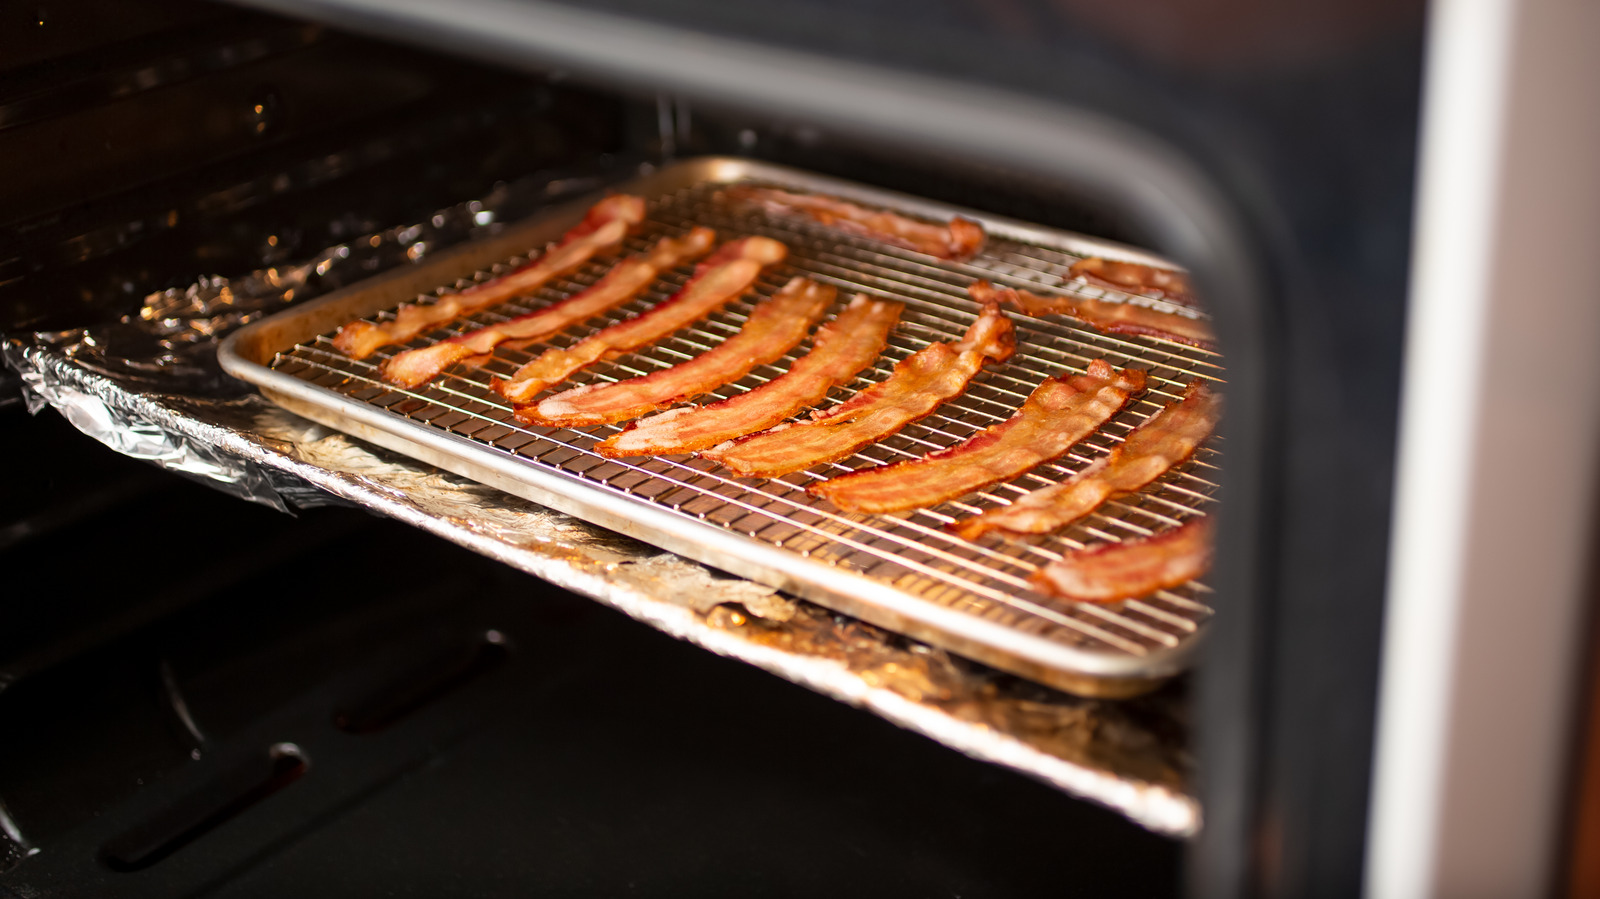 https://www.foodrepublic.com/img/gallery/the-one-step-that-will-stop-bacon-from-sticking-to-your-oven-rack/l-intro-1701447028.jpg